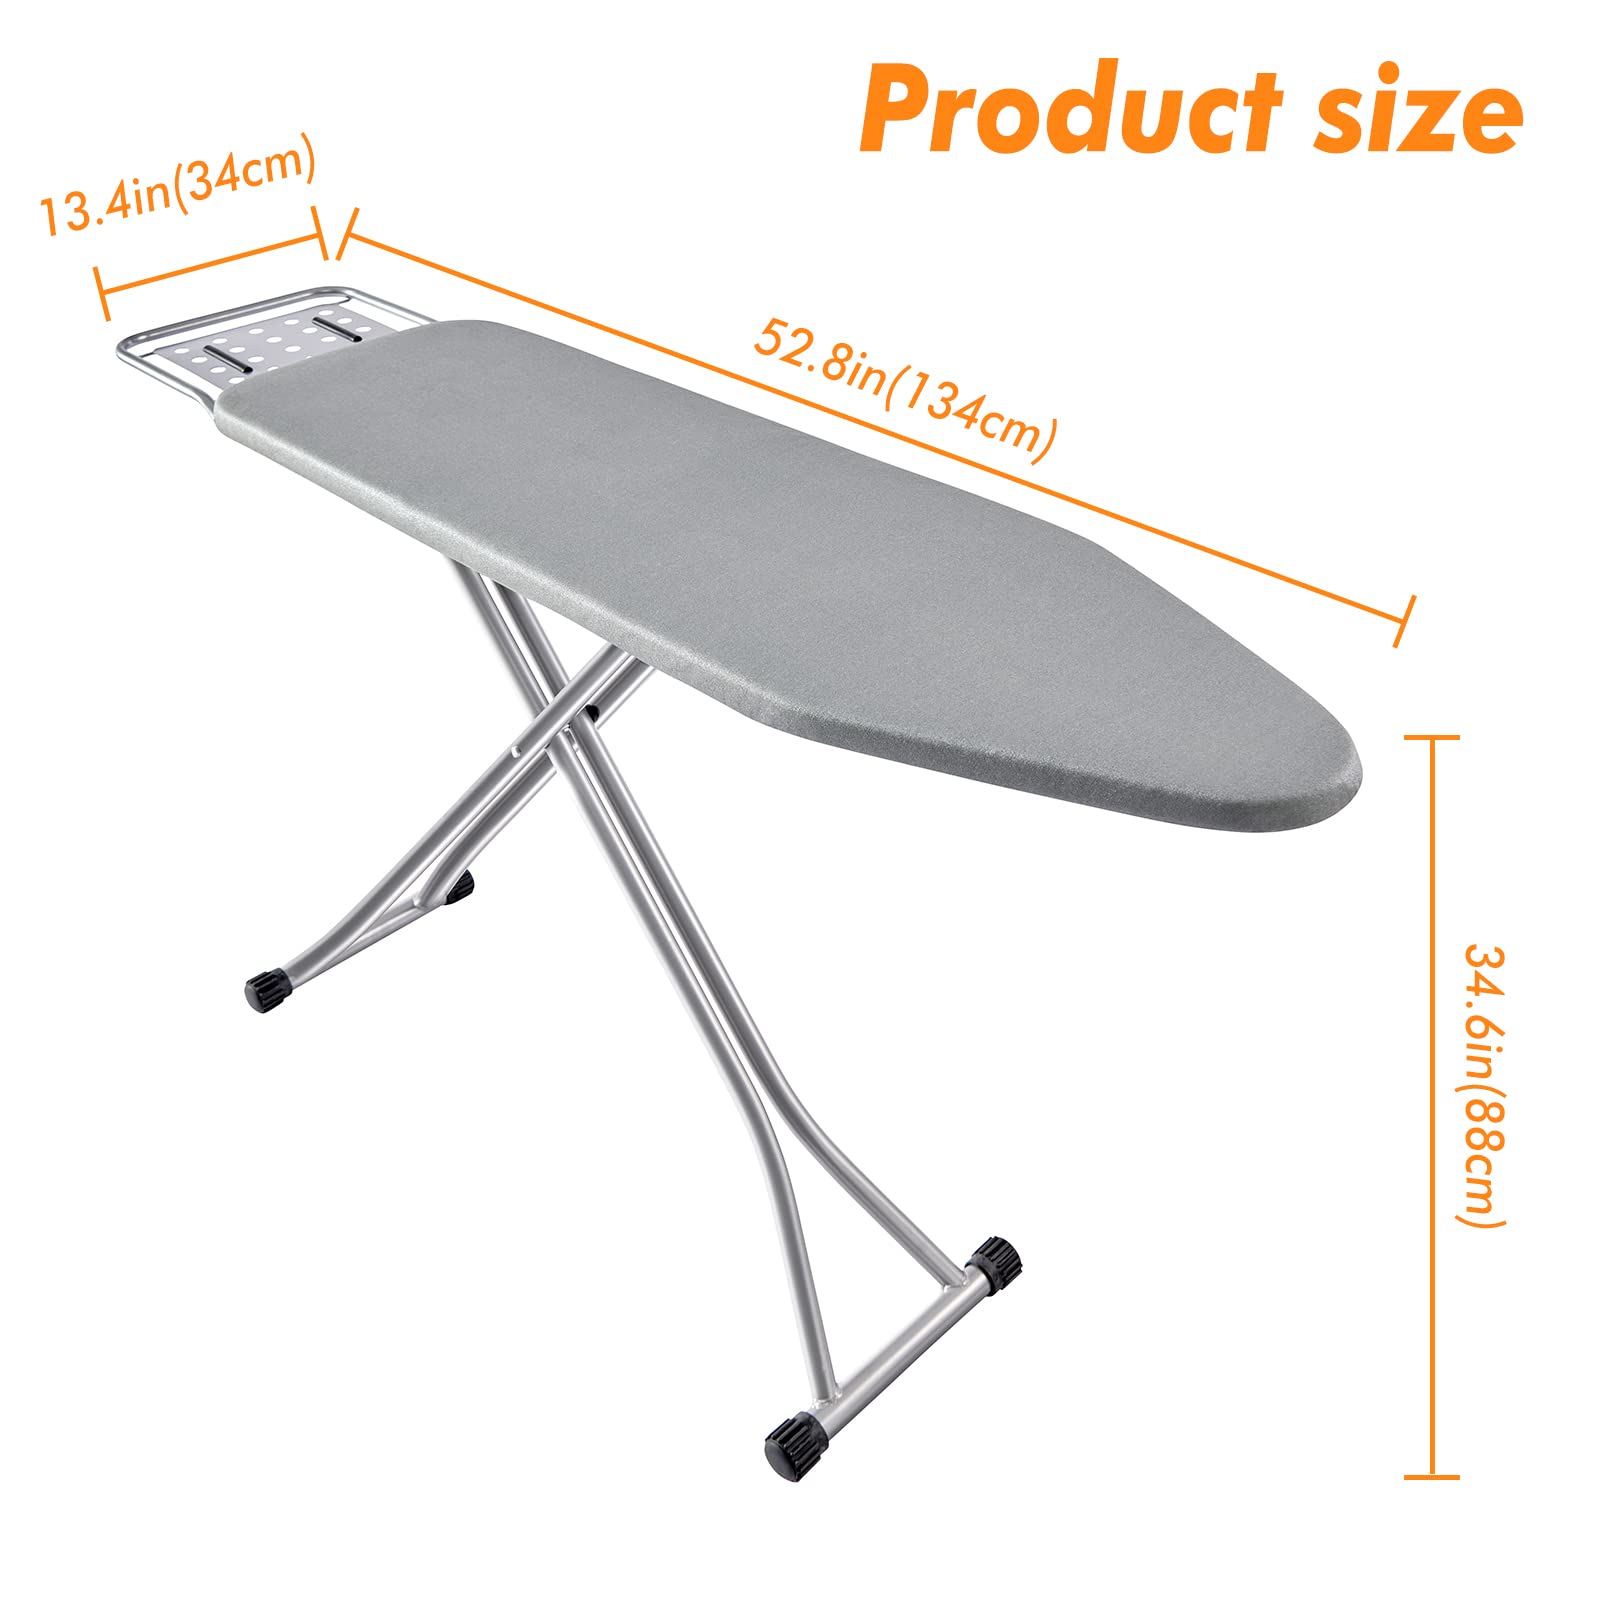 BKTD Ironing Board, Heat Resistant Cover Iron Board with Steam Iron Rest, Non-Slip Foldable Ironing Stand. Heavy Sturdy Metal Frame Legs Iron Stand(13 * 34 * 53 Inches) Silver Gray Color